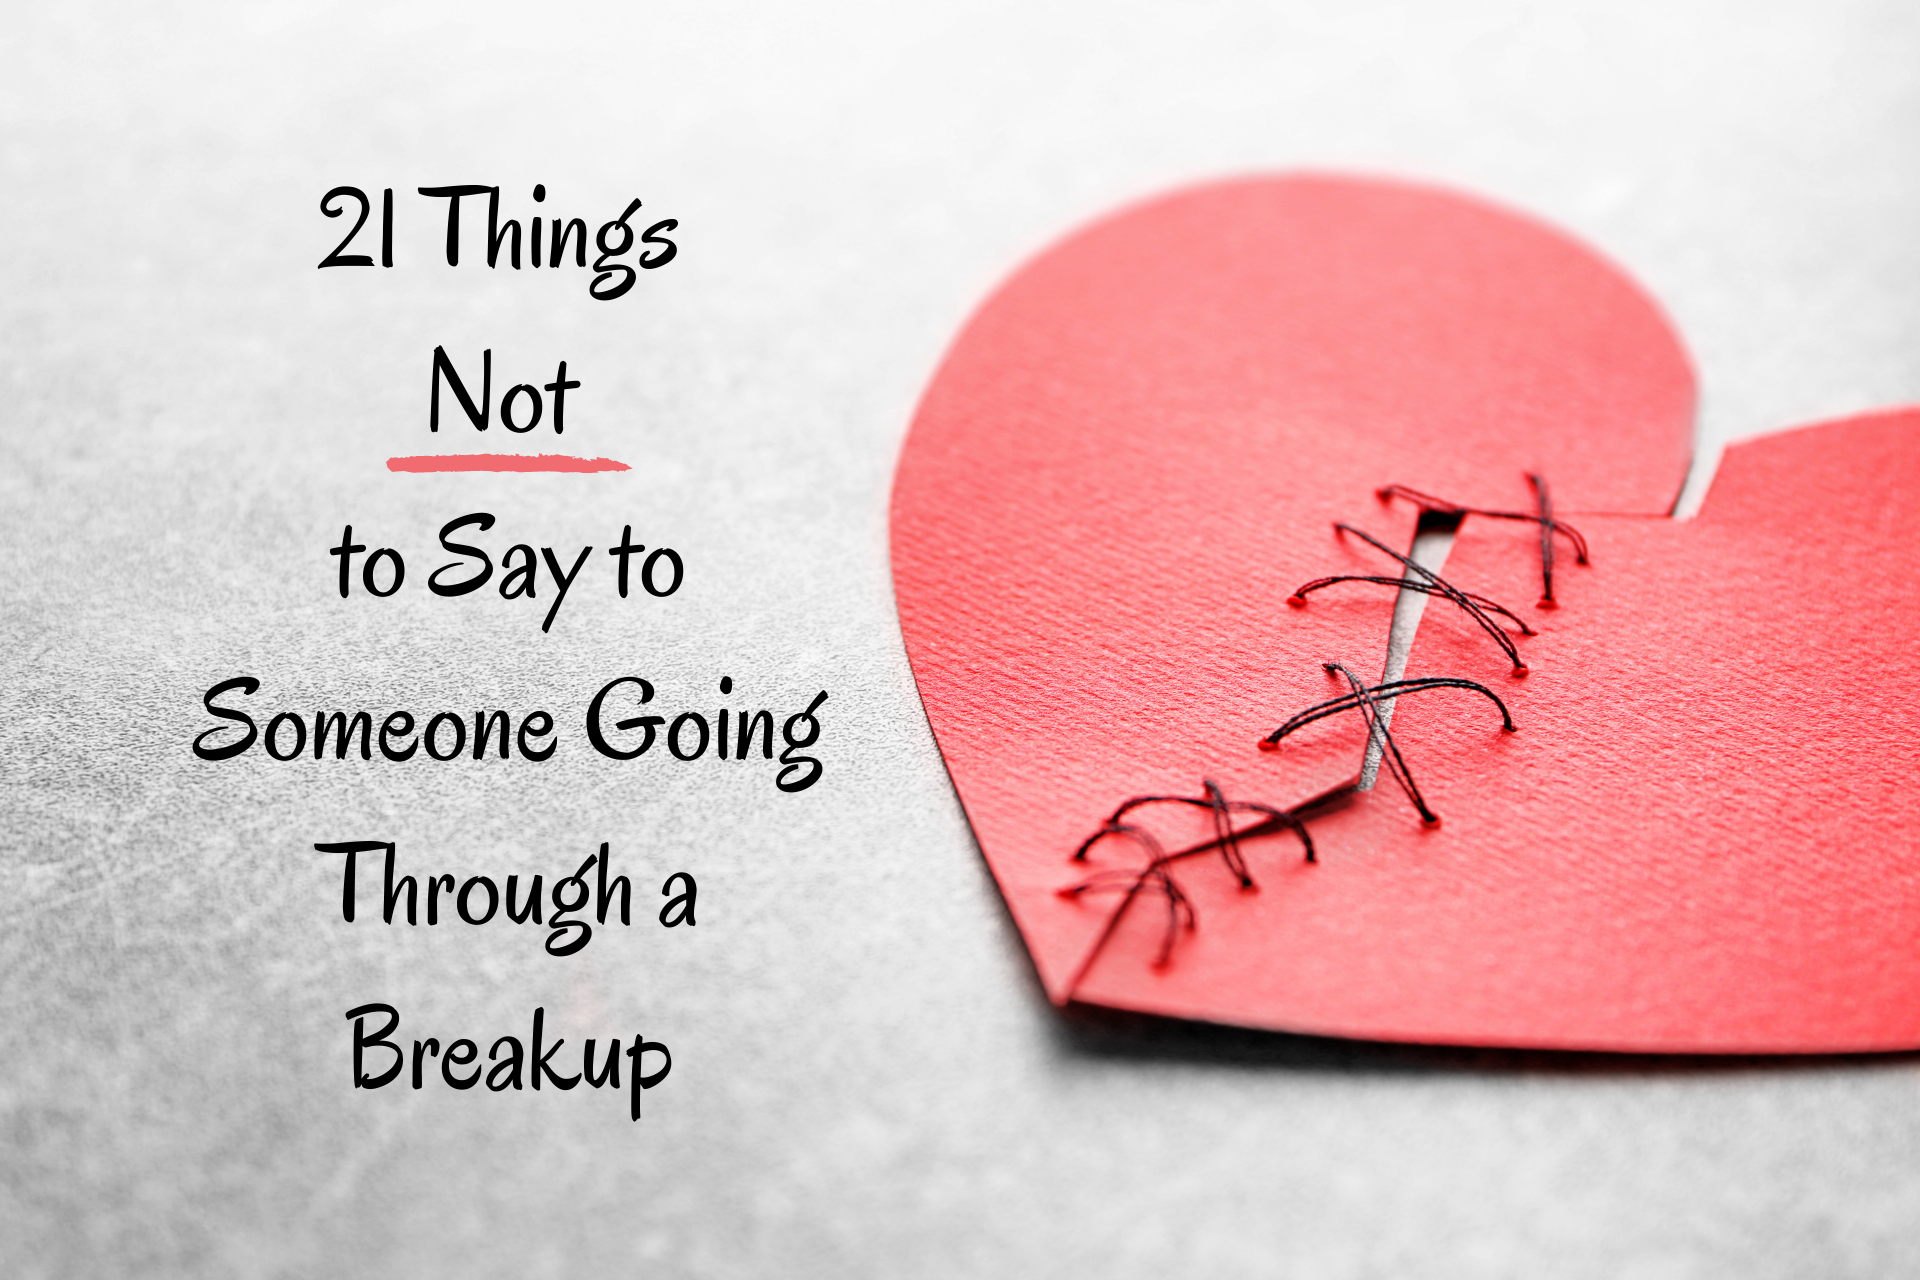 21 Things Not to Say to Someone Going Through a Breakup.